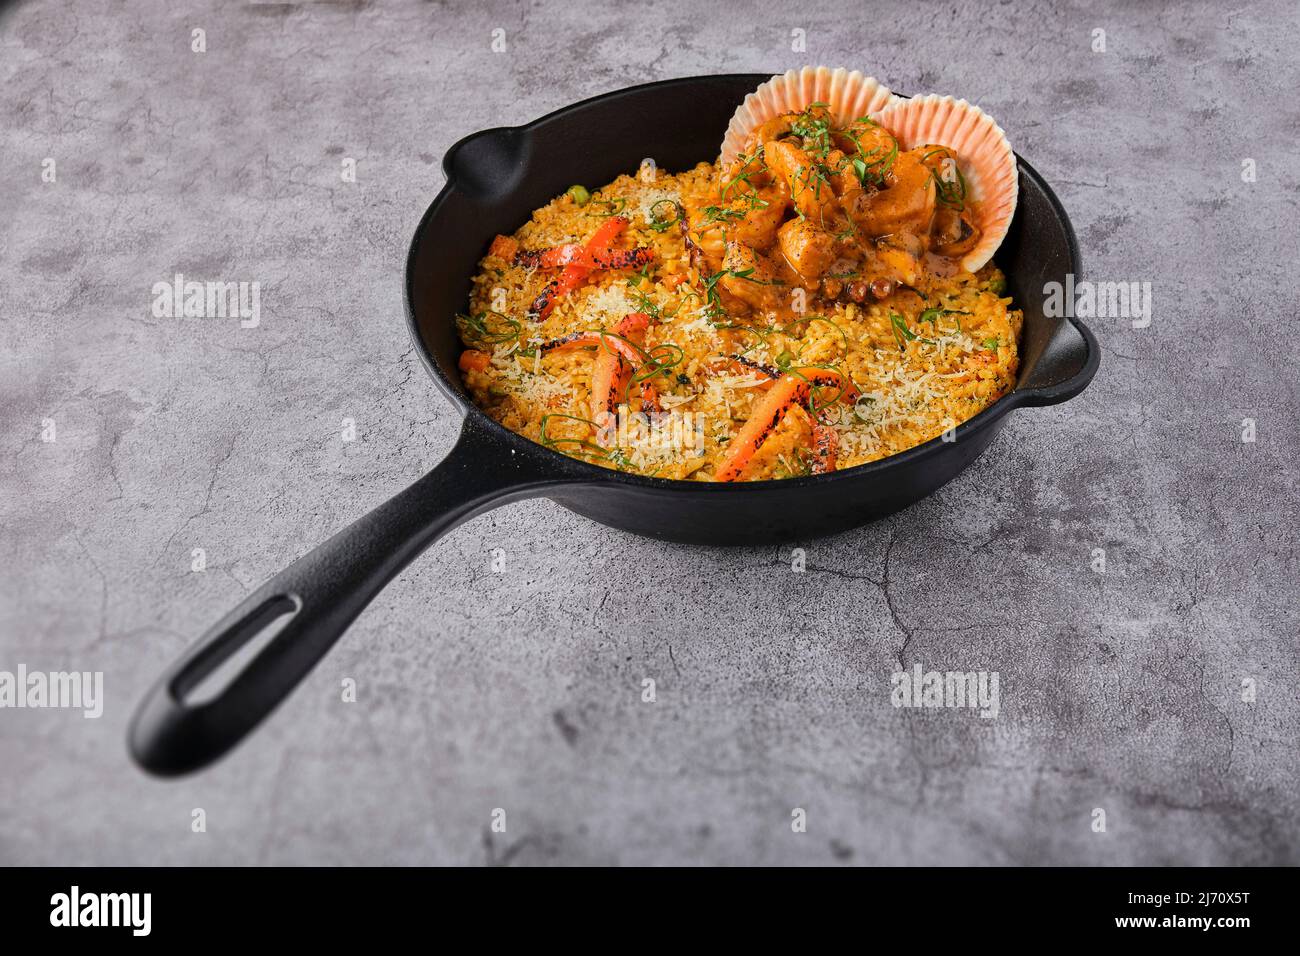 https://c8.alamy.com/comp/2J70X5T/peruvian-food-rice-with-seafood-arroz-con-mariscos-food-served-in-pan-selective-focus-2J70X5T.jpg